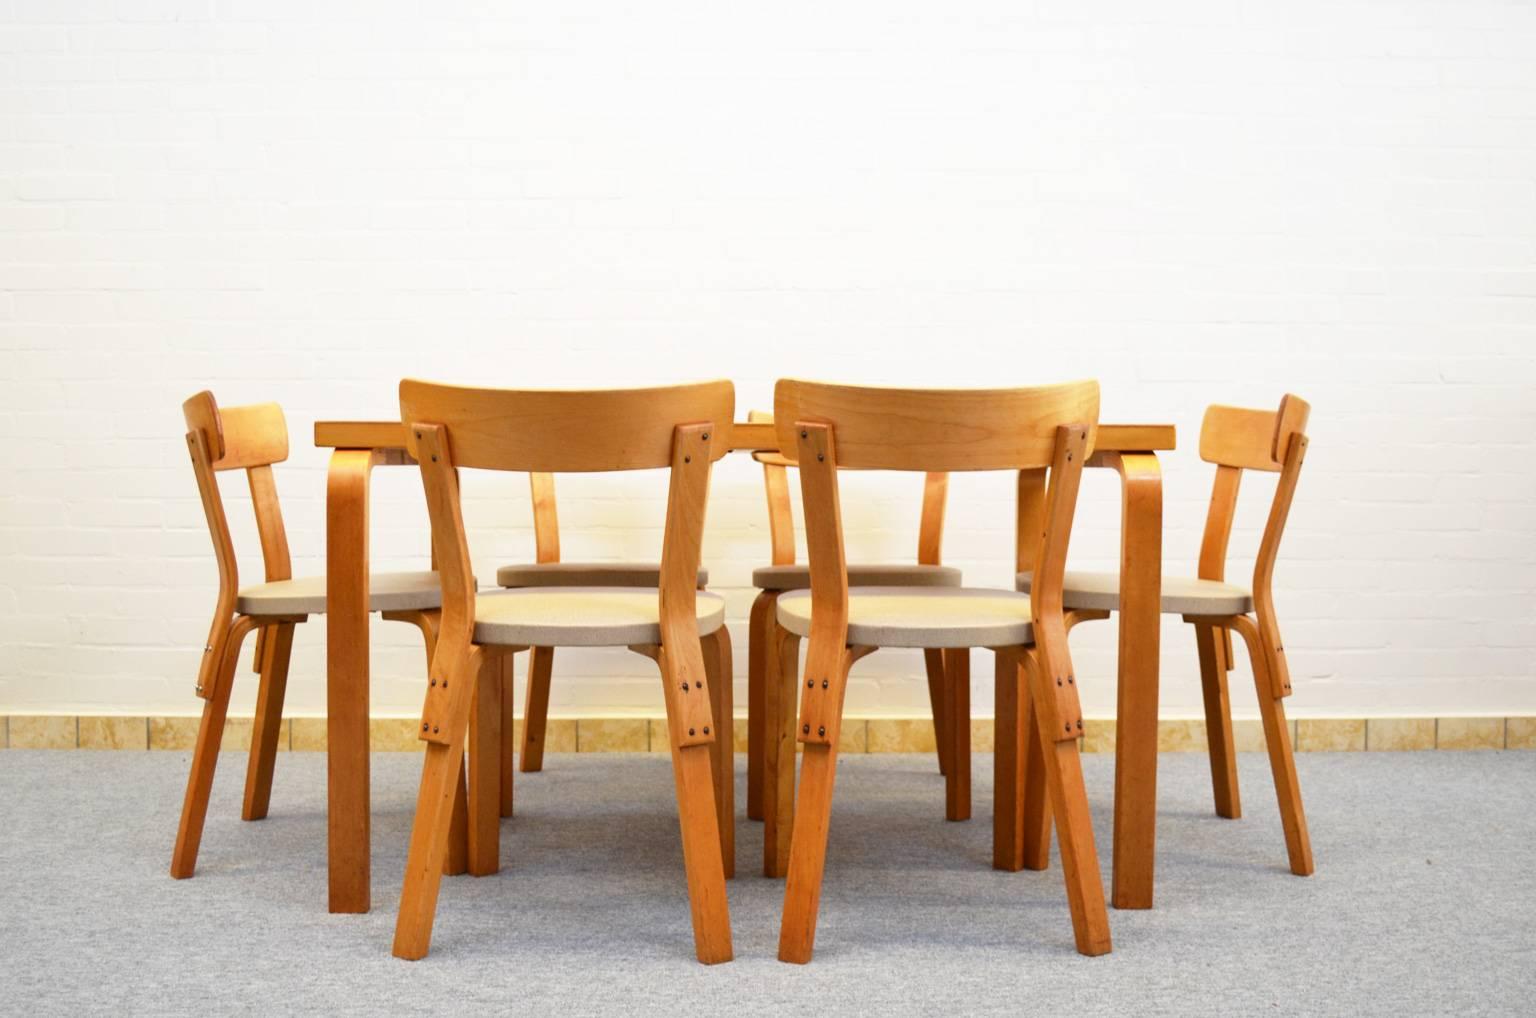 Iconic dining set from Finnish designer and architect Alvar Aalto. De set consists of a table (model 82A) and six chairs (model 69) with vinyl upholstery. All original from first owner.
Measurements table: Height 69 cm, width 121 cm, depth 75